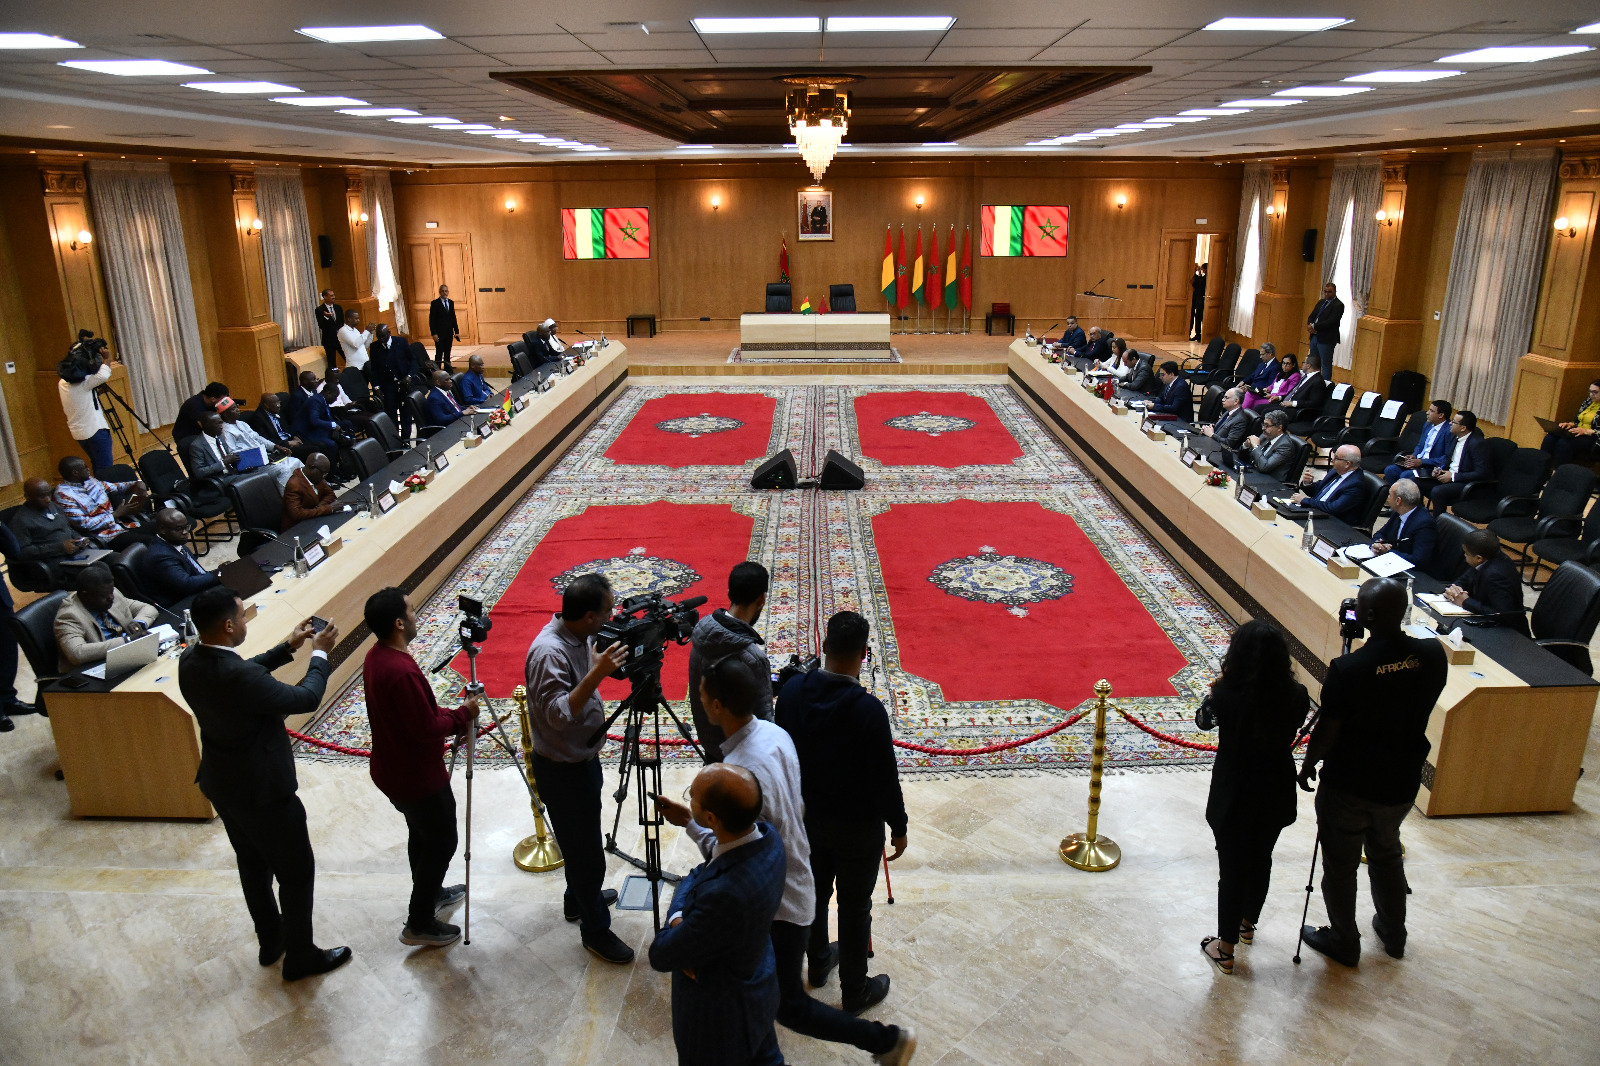 Guinea: Morocco‘s Autonomy Plan, the “ONLY Credible and Realistic” Solution to Sahara Issue